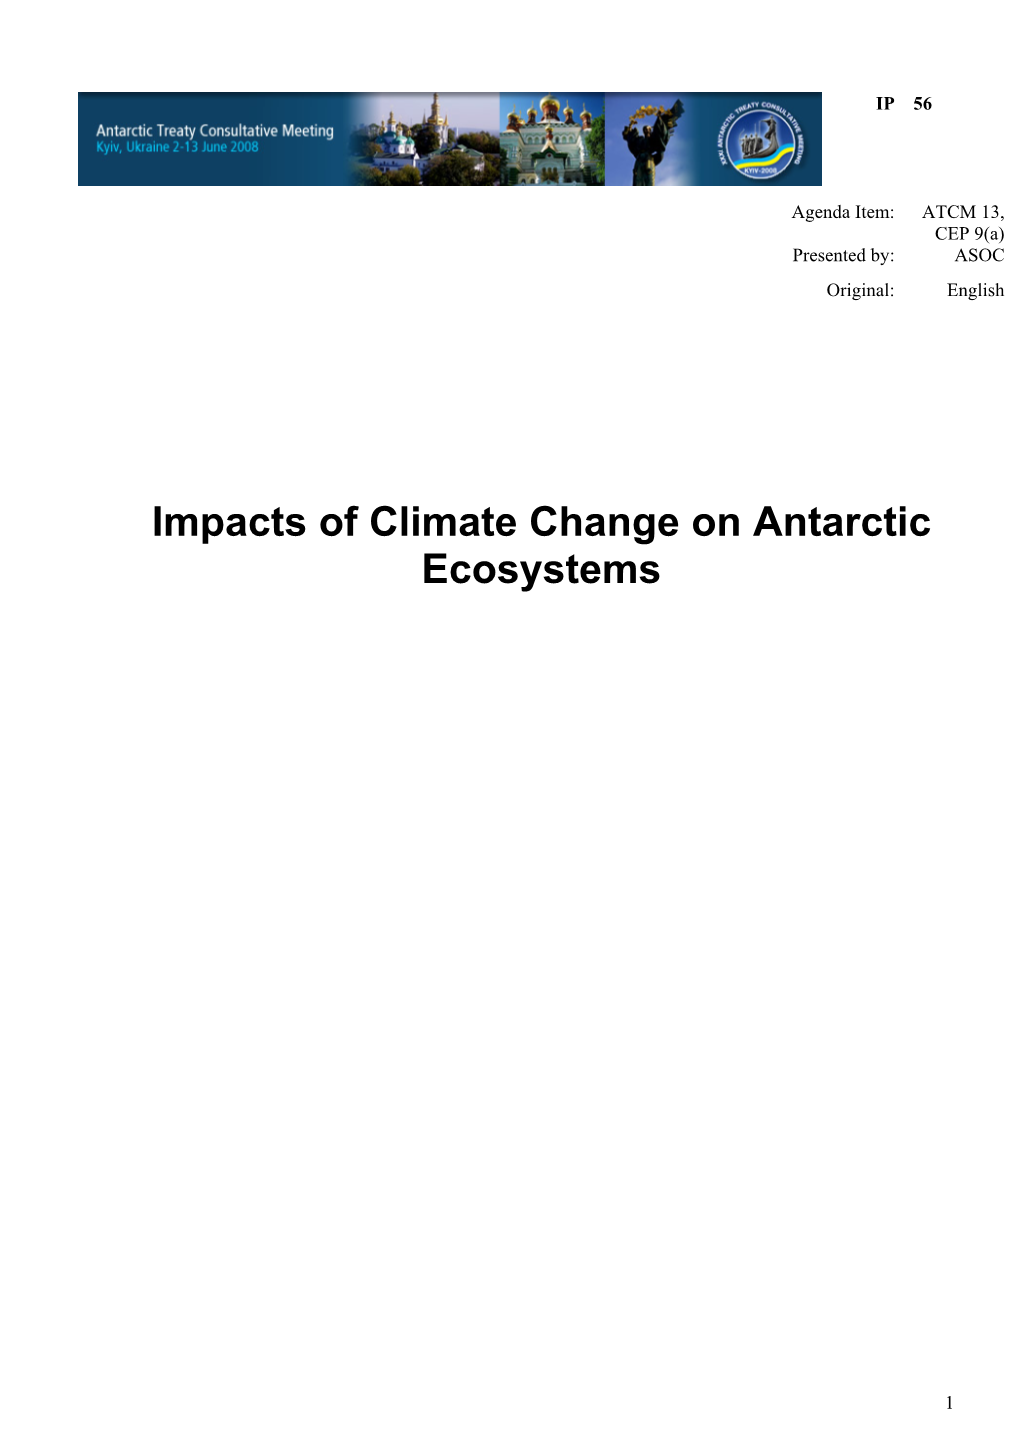 Impacts of Climate Change on Antarctic Ecosystems